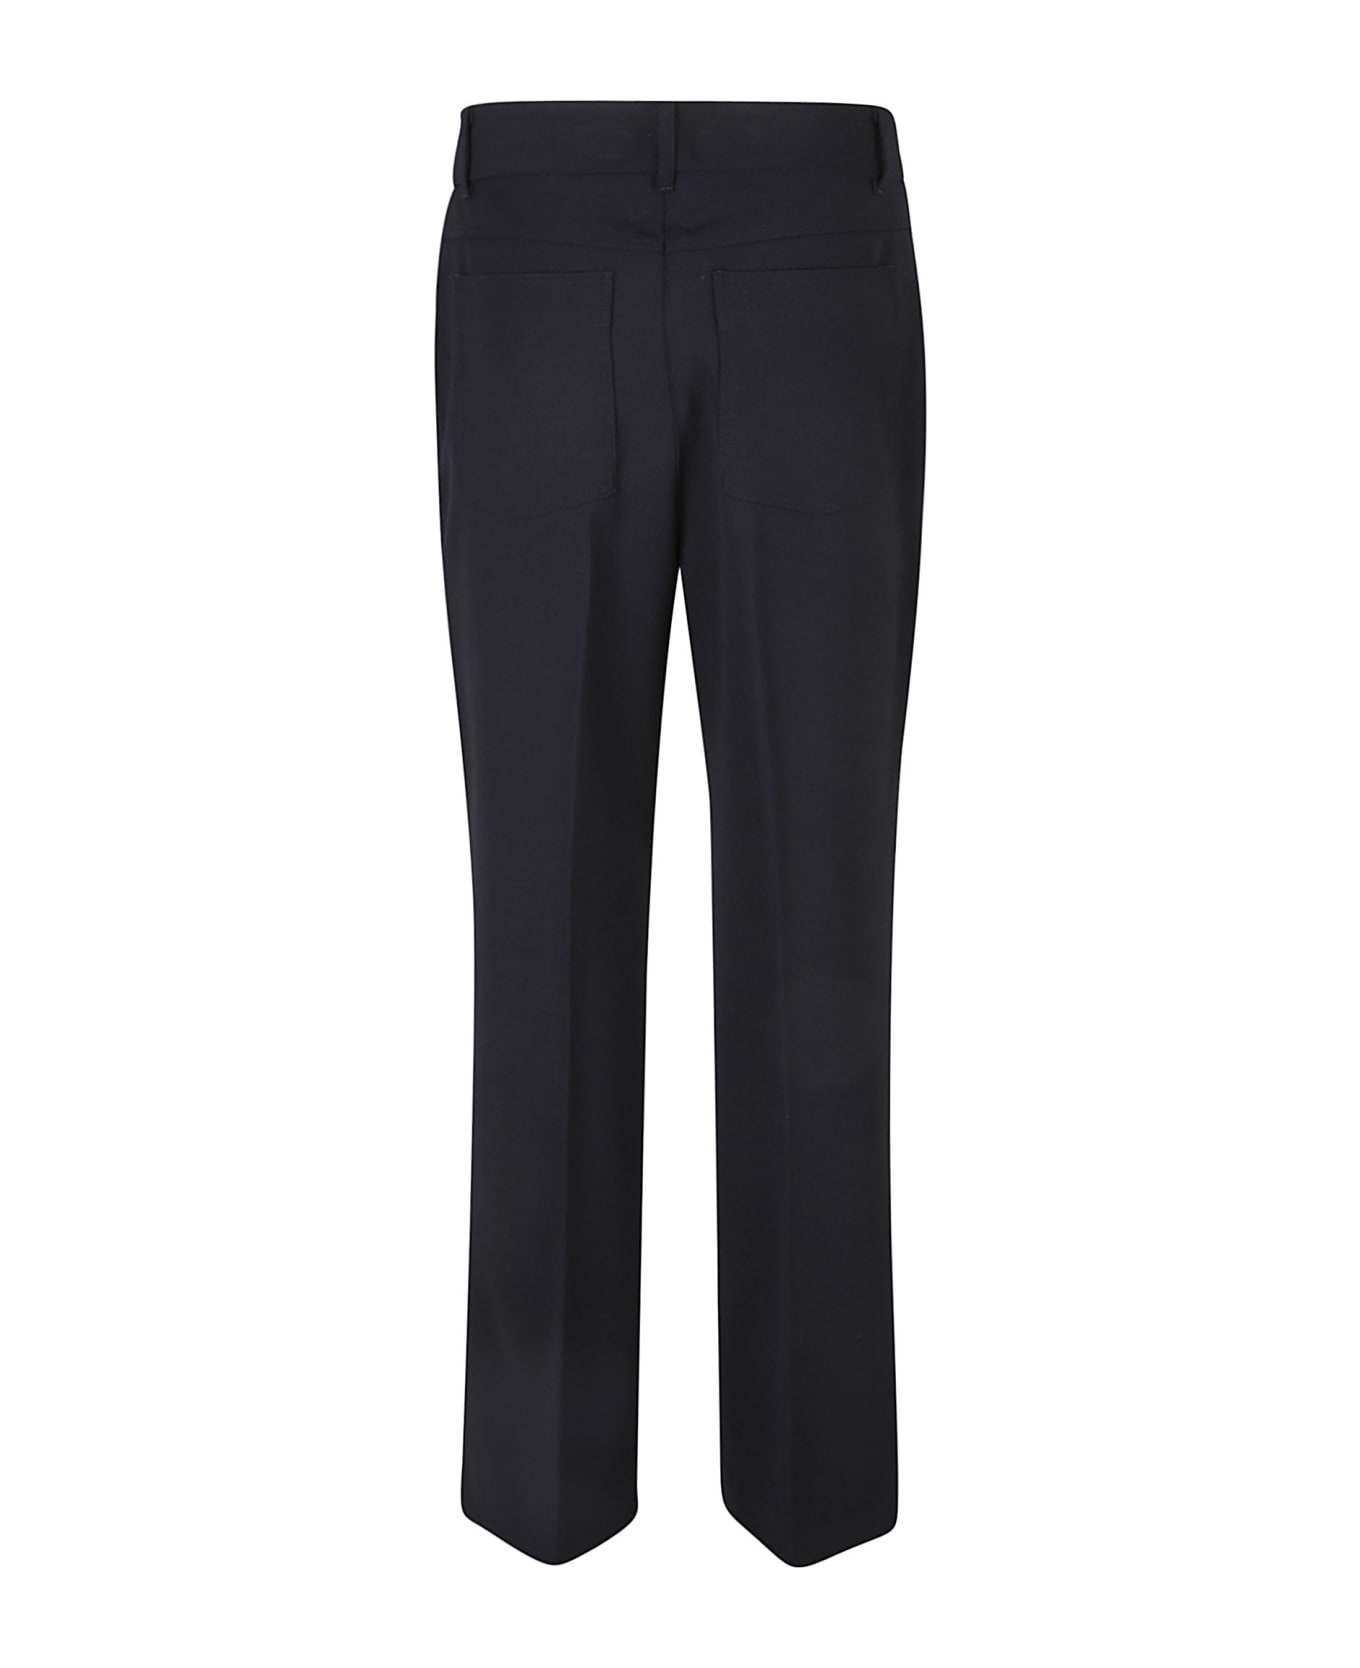 Stella McCartney Concealed Trousers